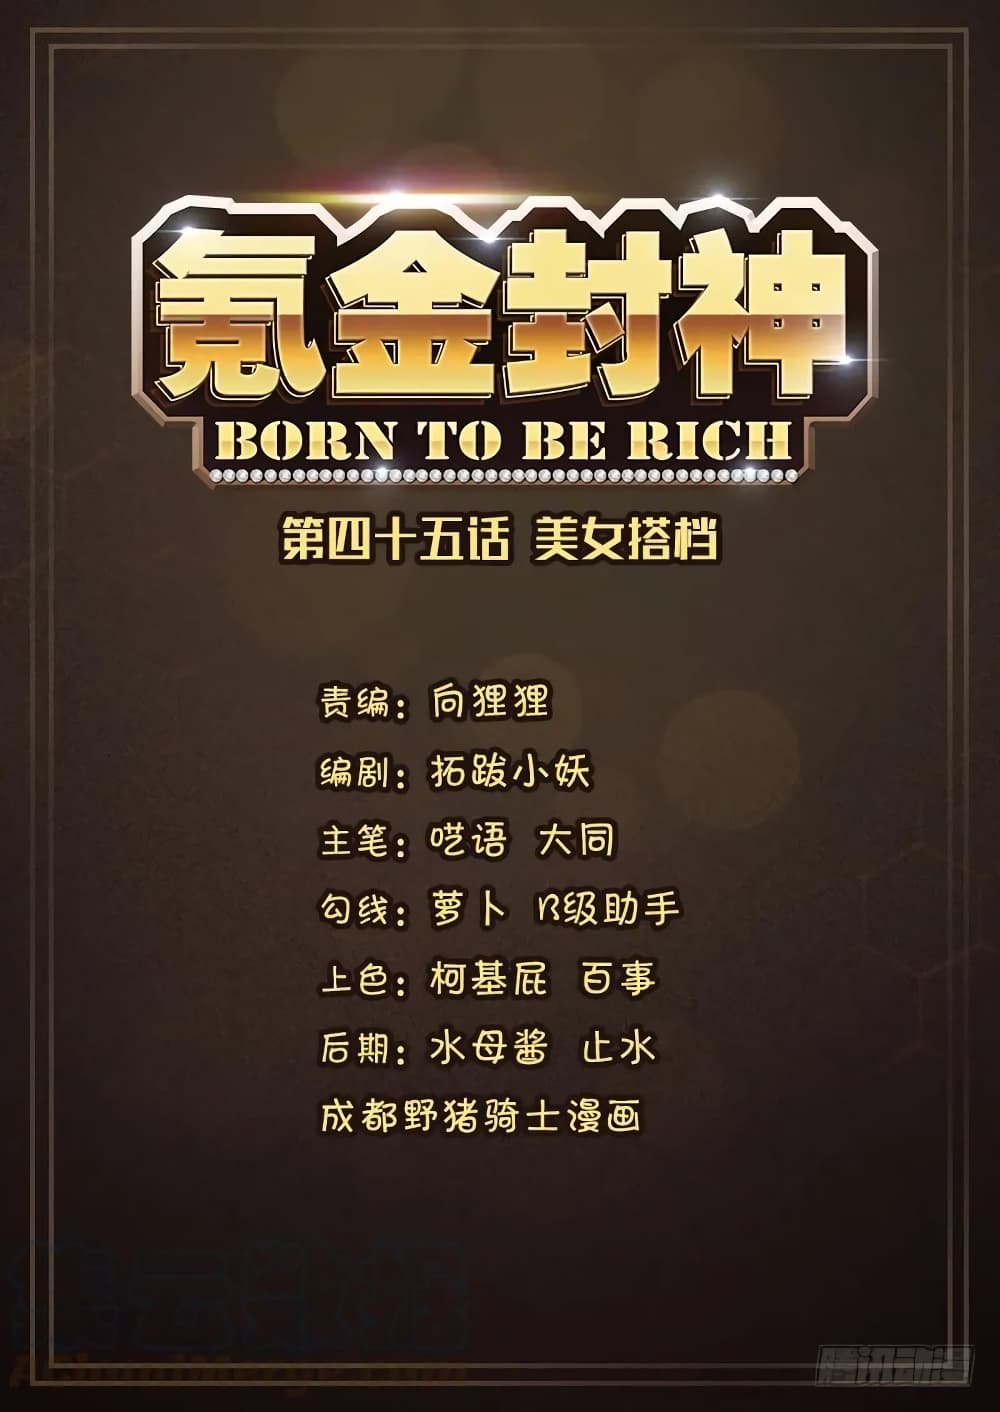 Born To Be Rich 46-46